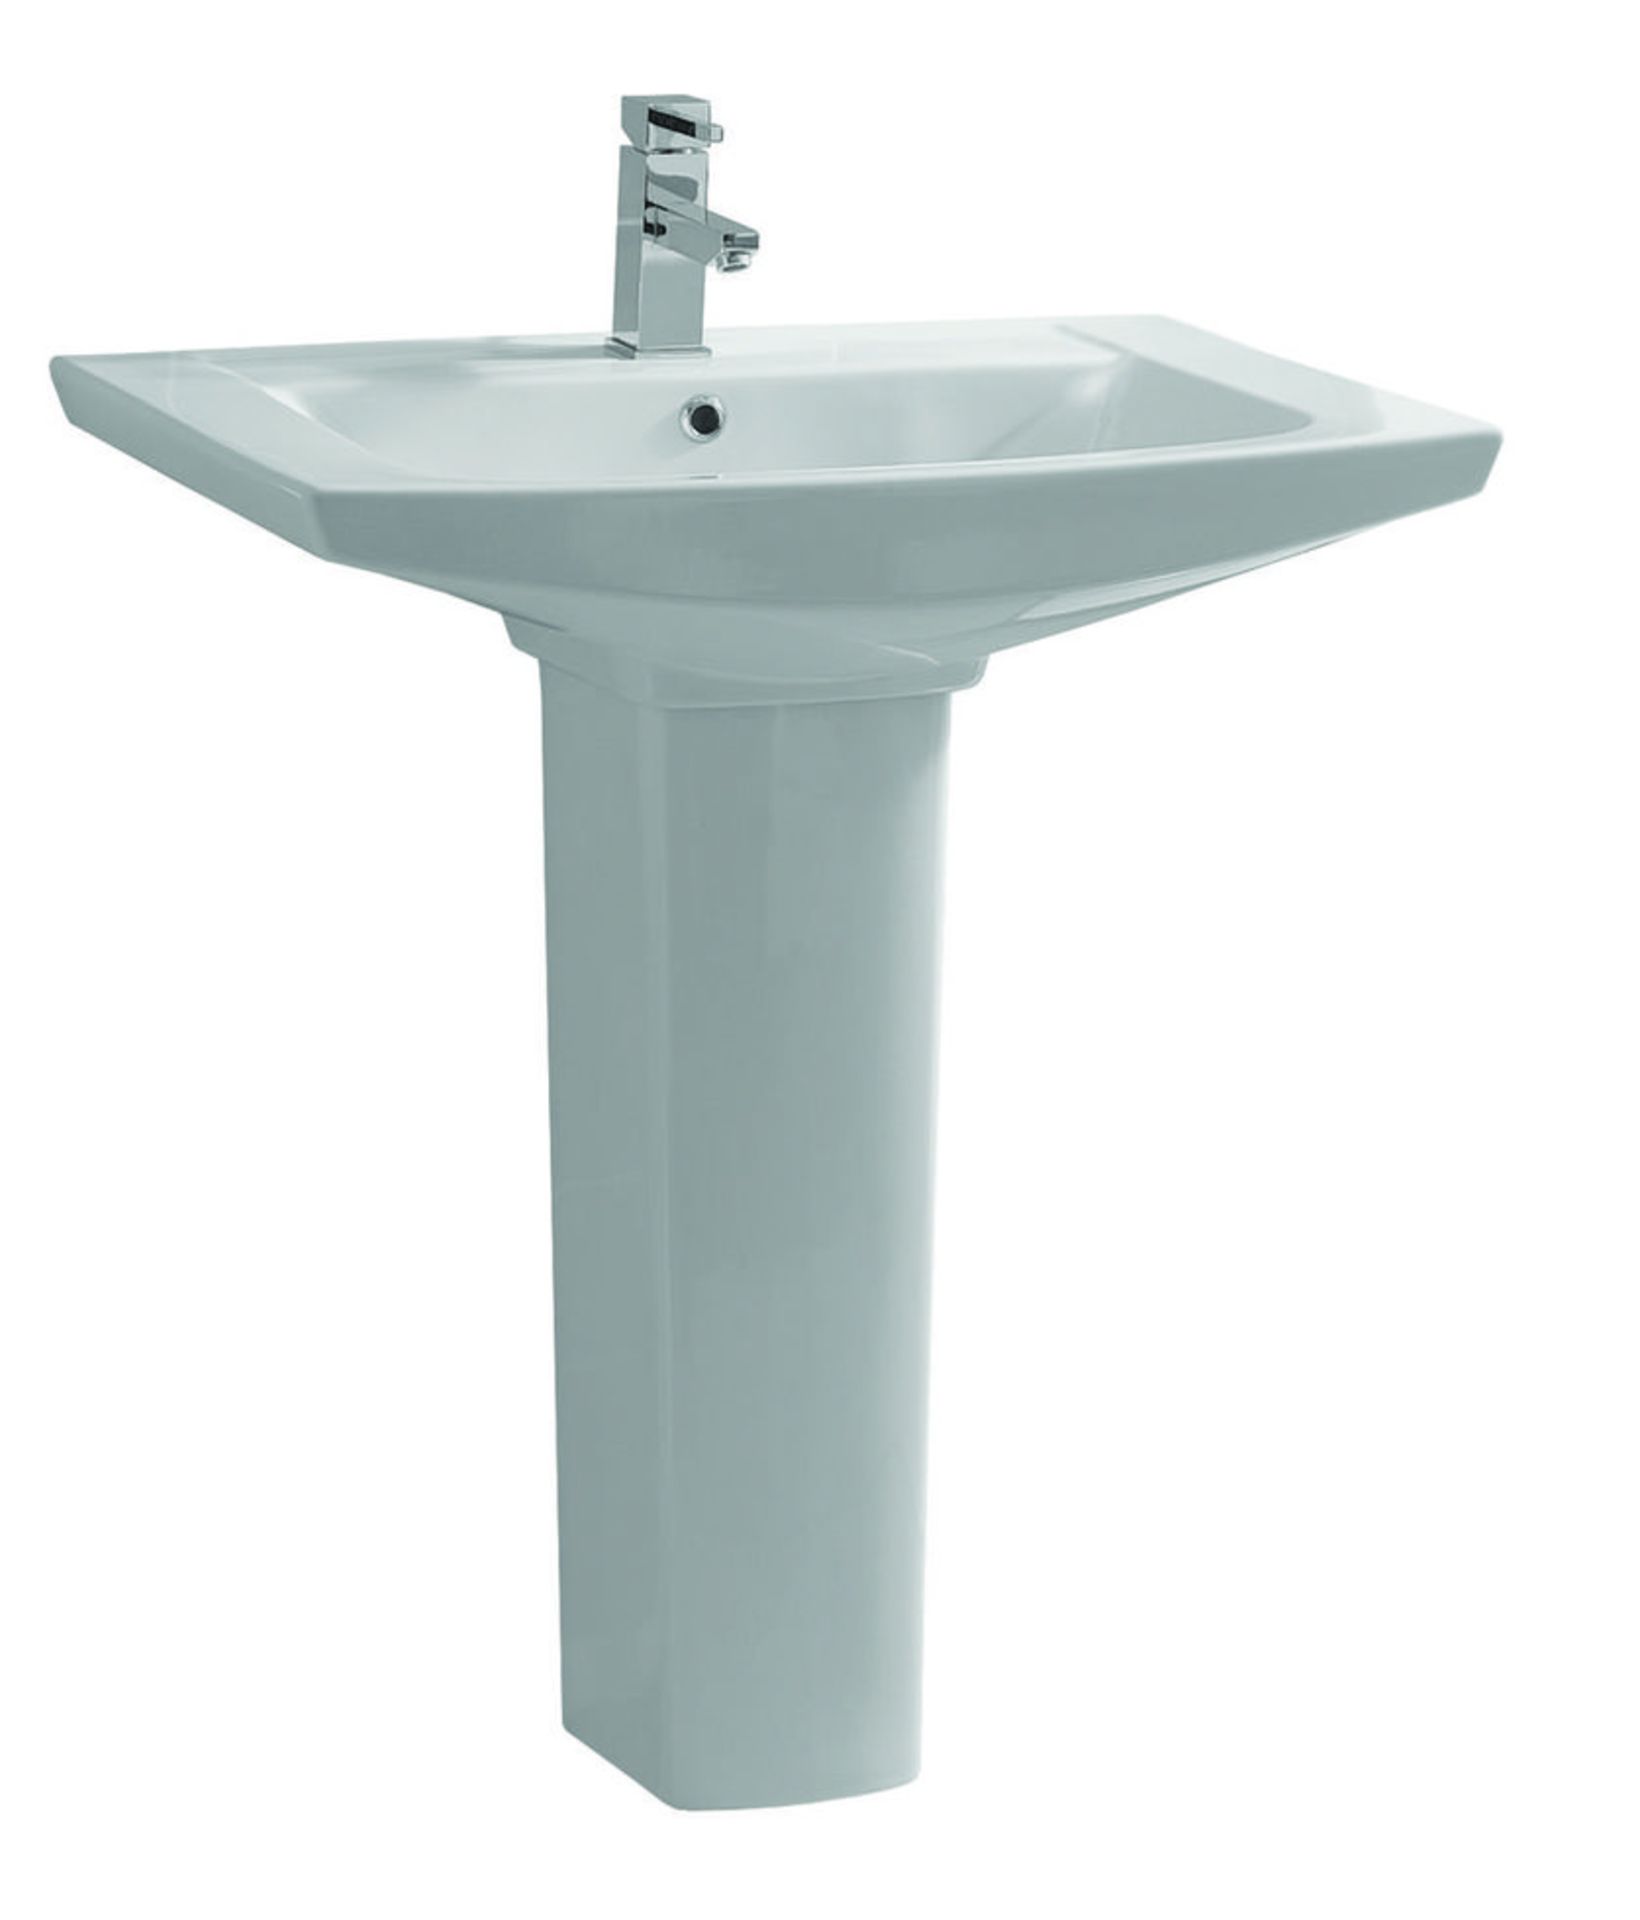 20 x Vogue Bathrooms CAPRICE Single Tap Hole SINK BASINS With Full Pedestals - Vogue Bathrooms - - Image 2 of 2